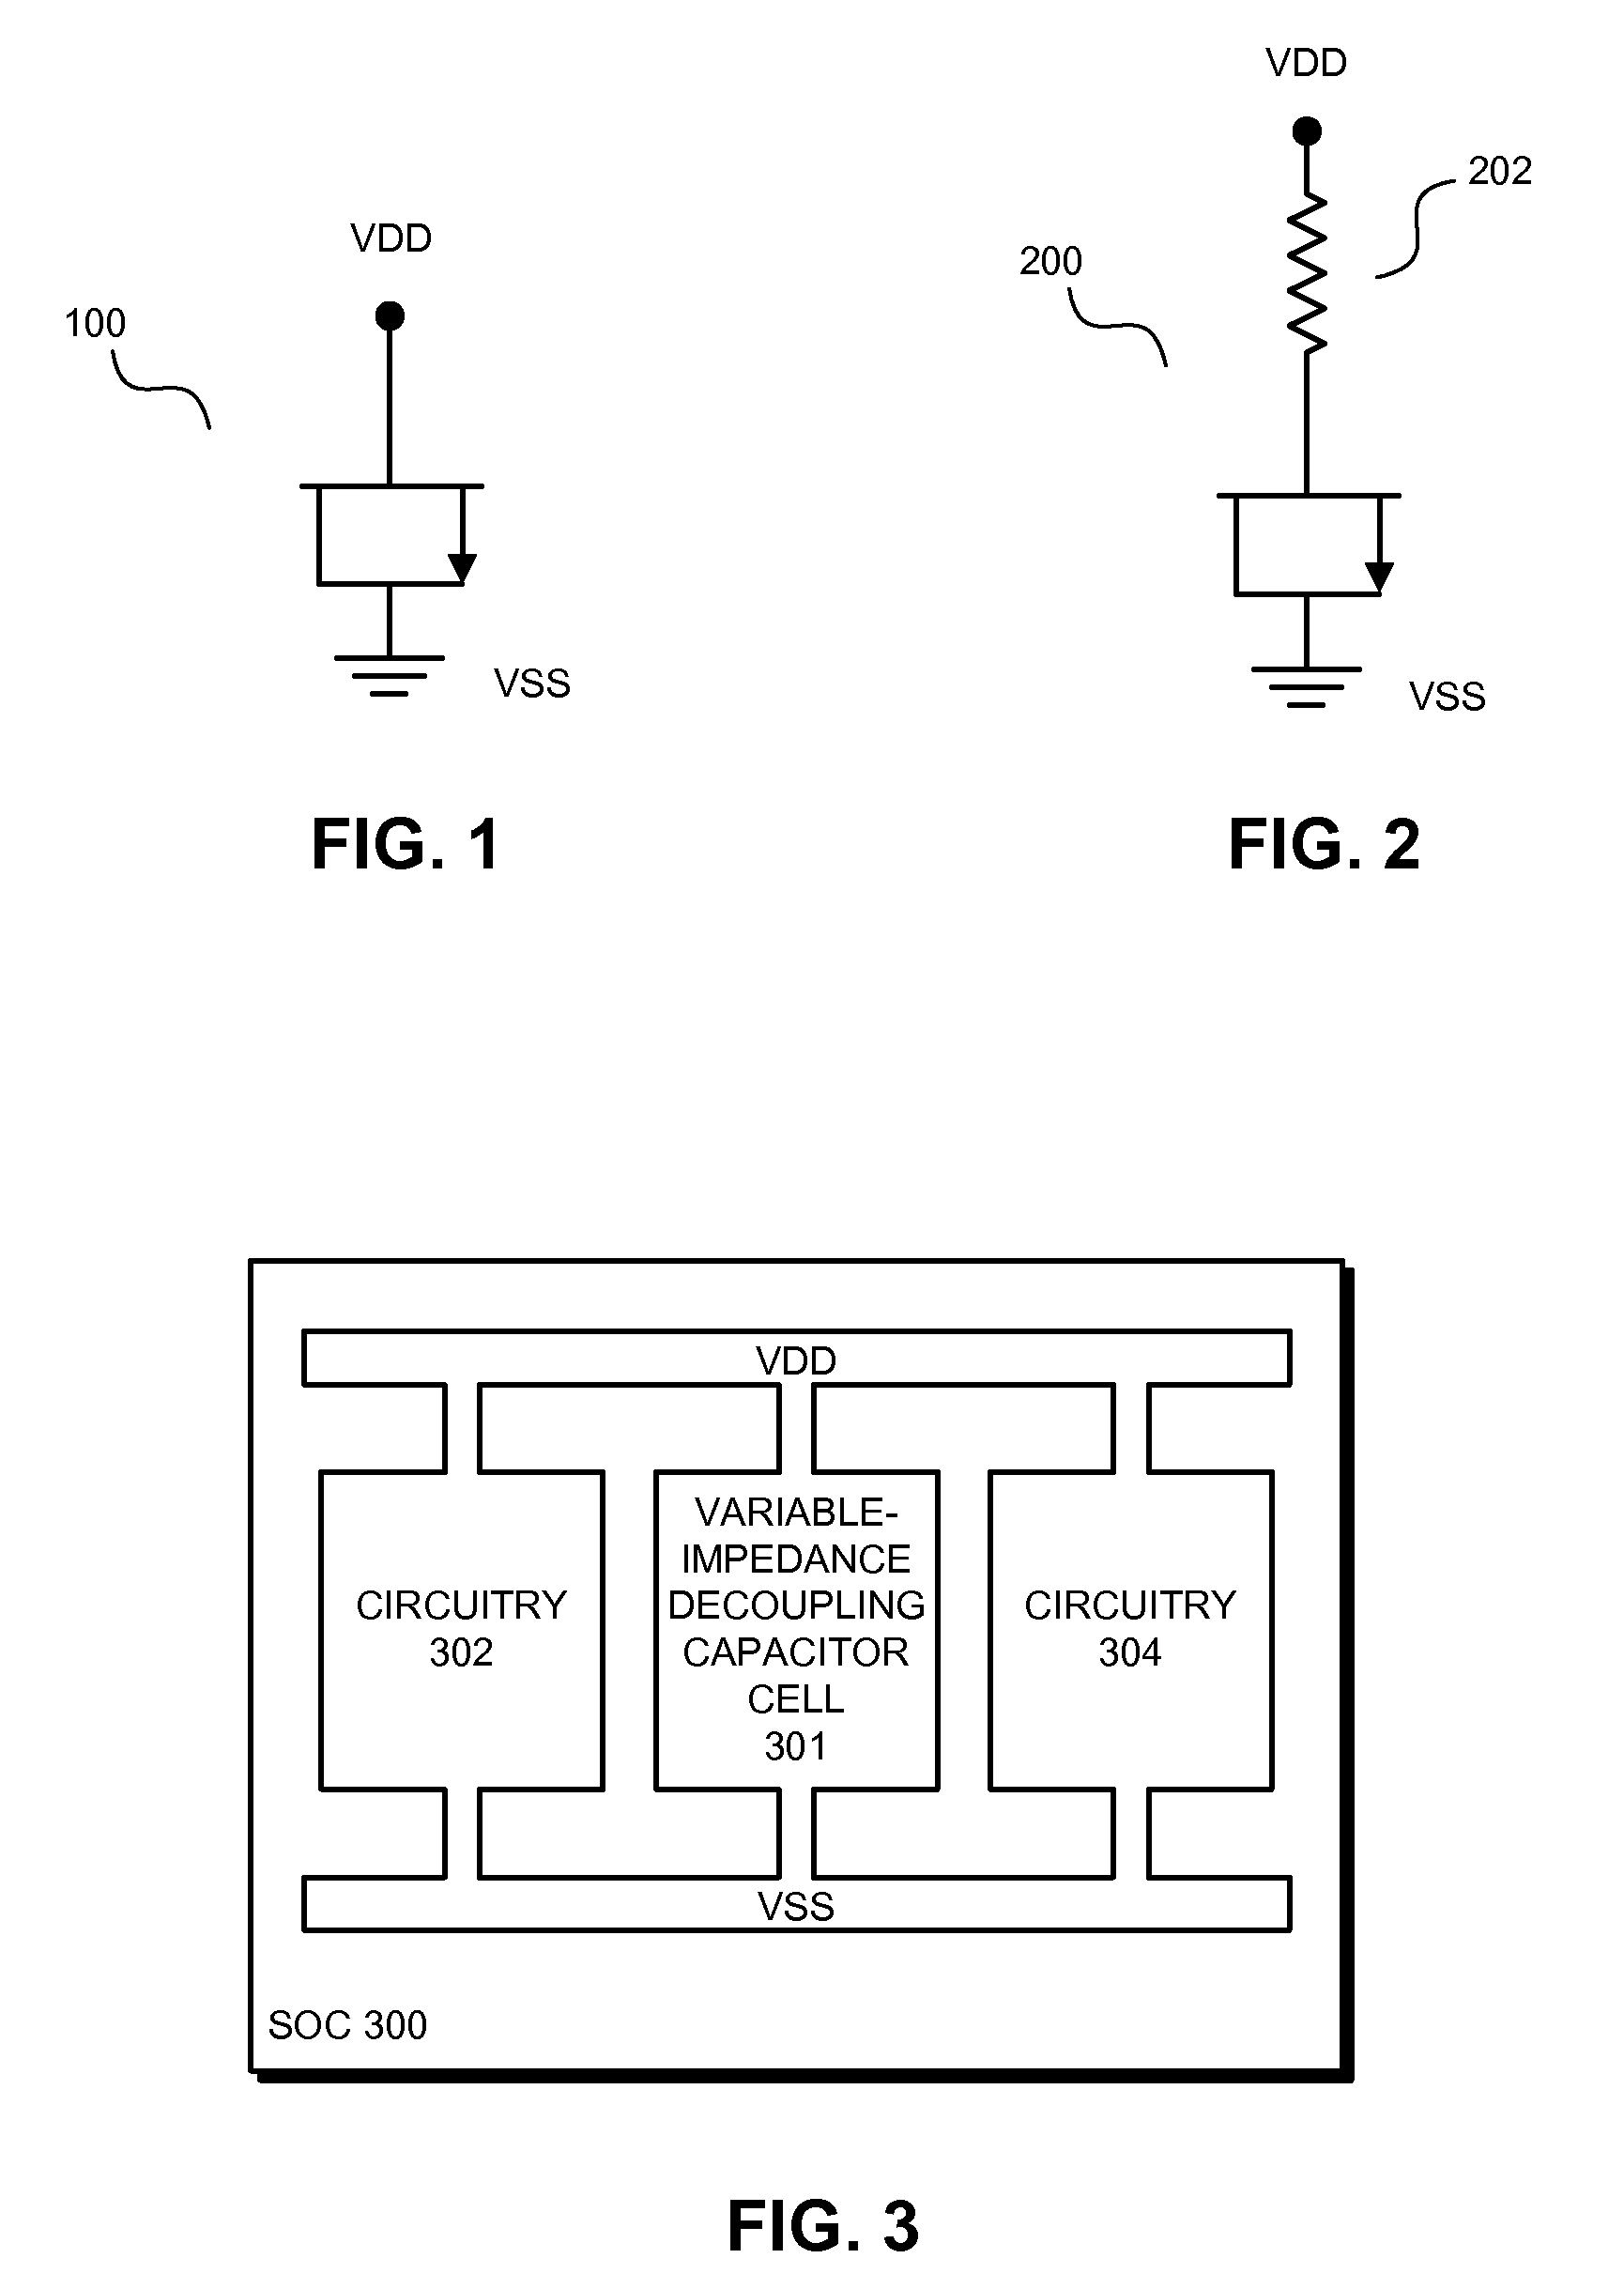 Variable-impedance gated decoupling cell